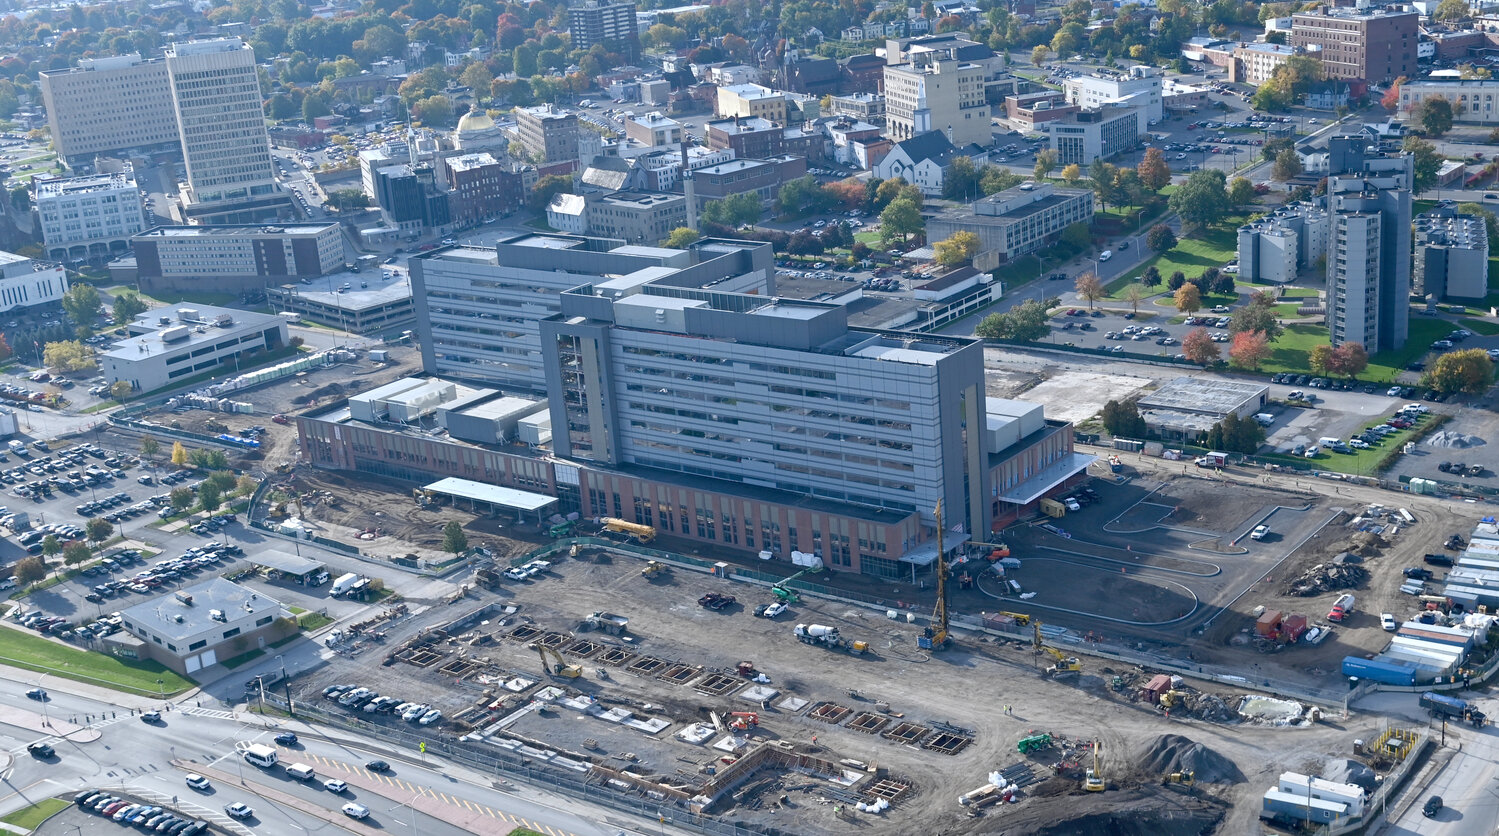 Pictured is an aerial view of the under construction Wynn Hospital in Utica. Photo captured in October 2022.